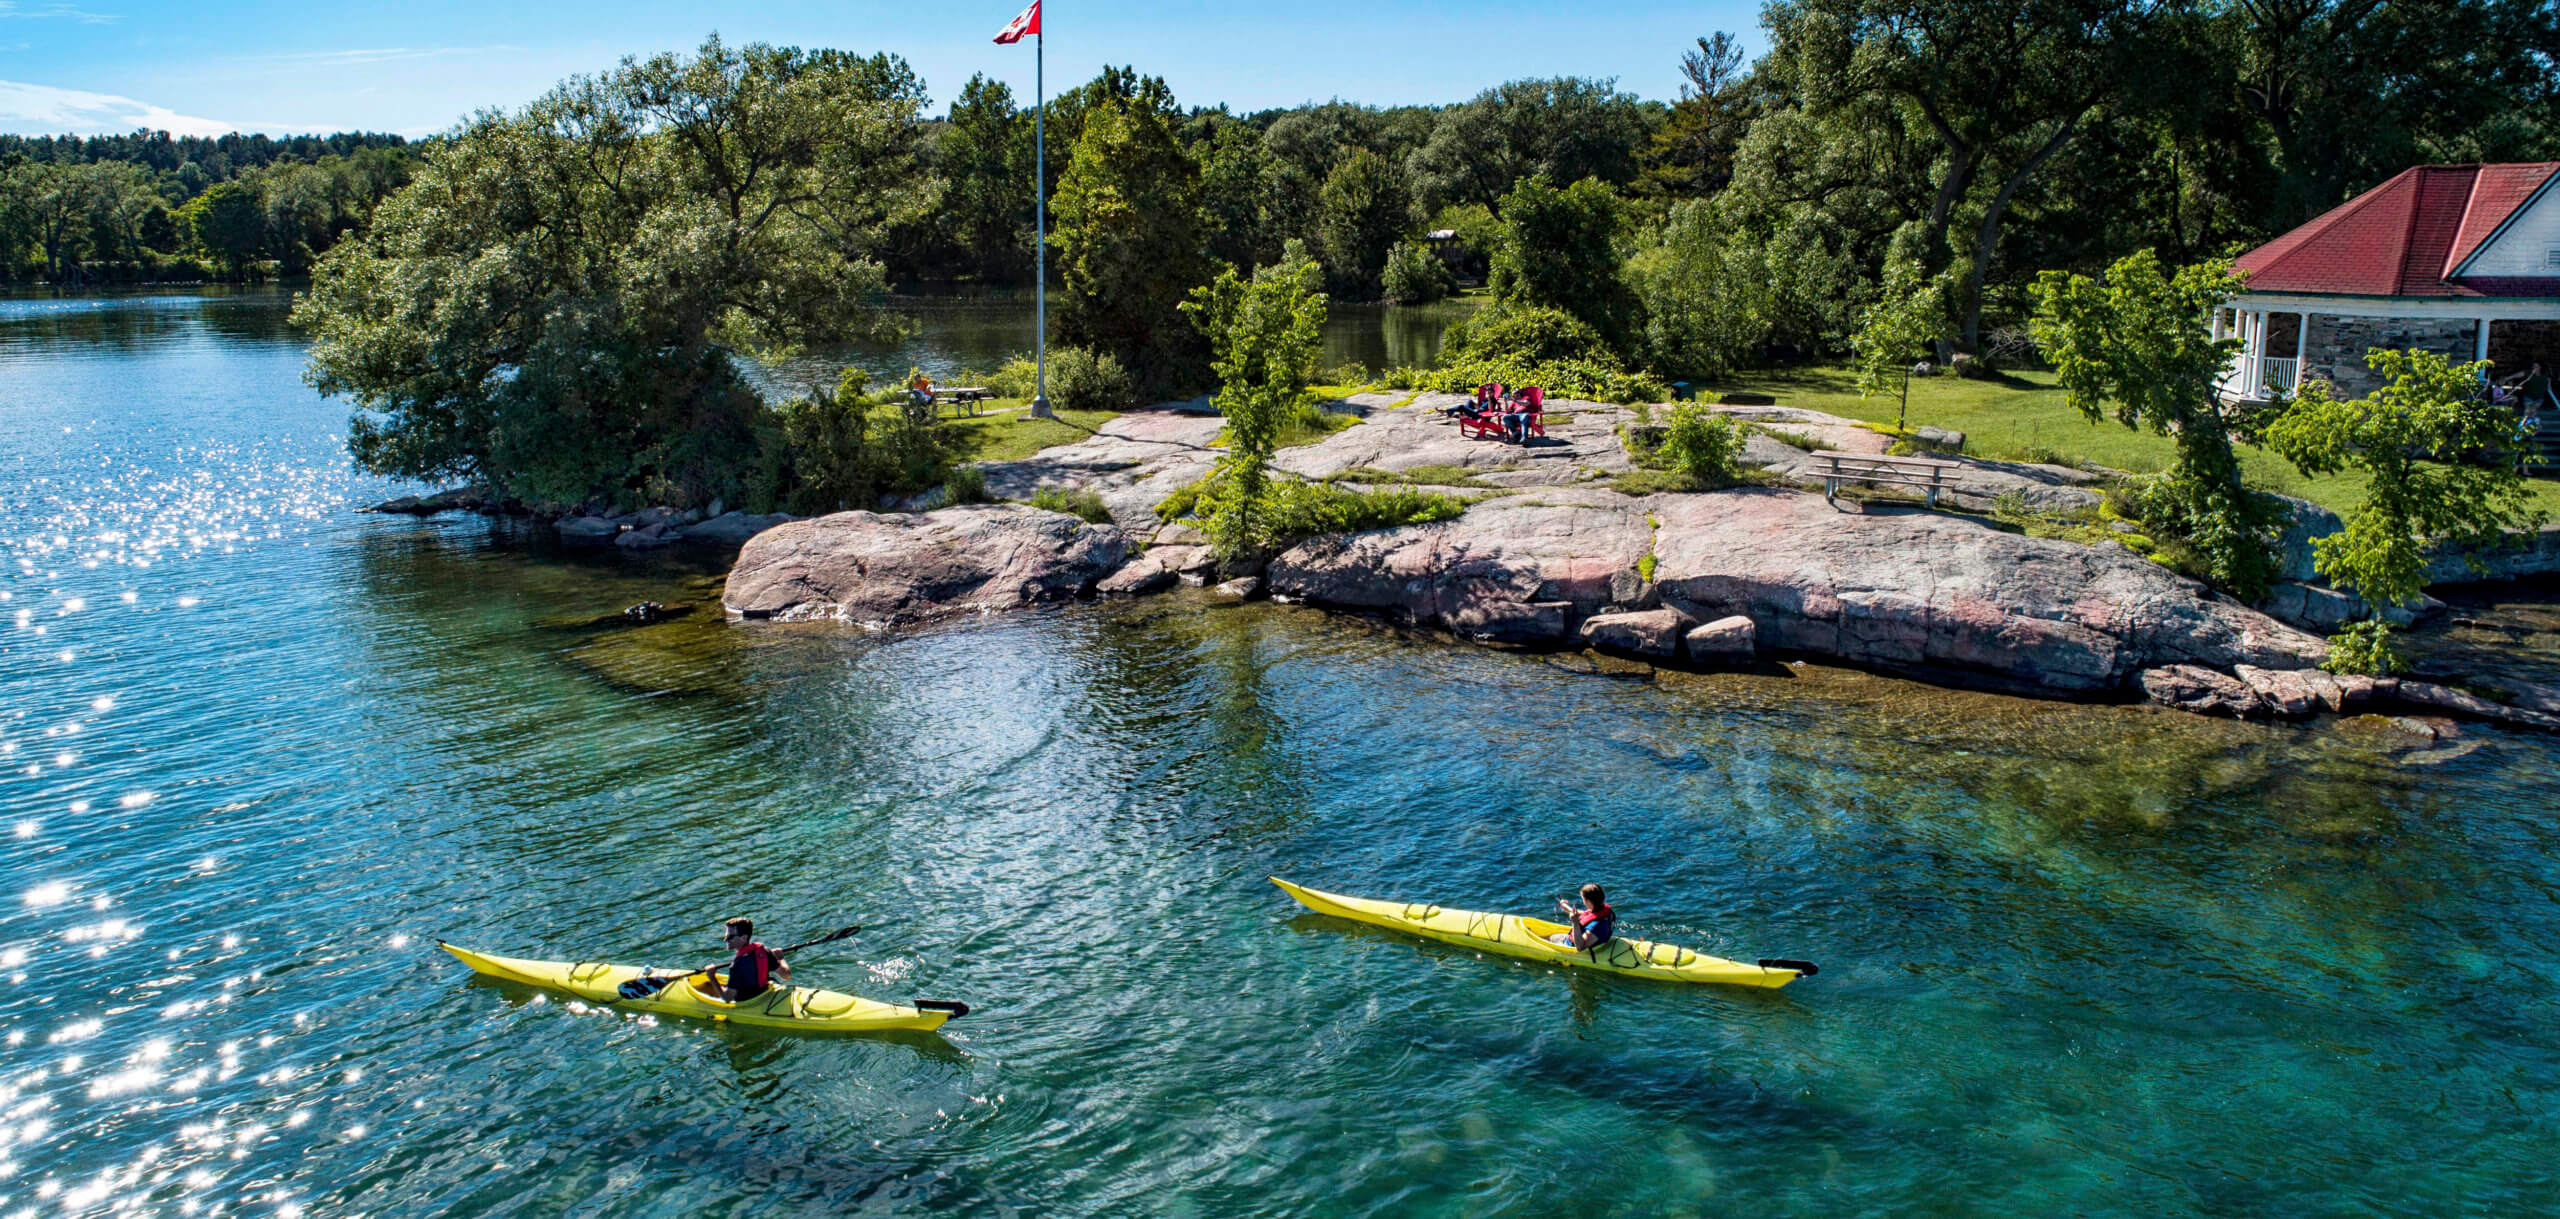 5 Ways To Experience Ontario’s Thousand Islands In 2022